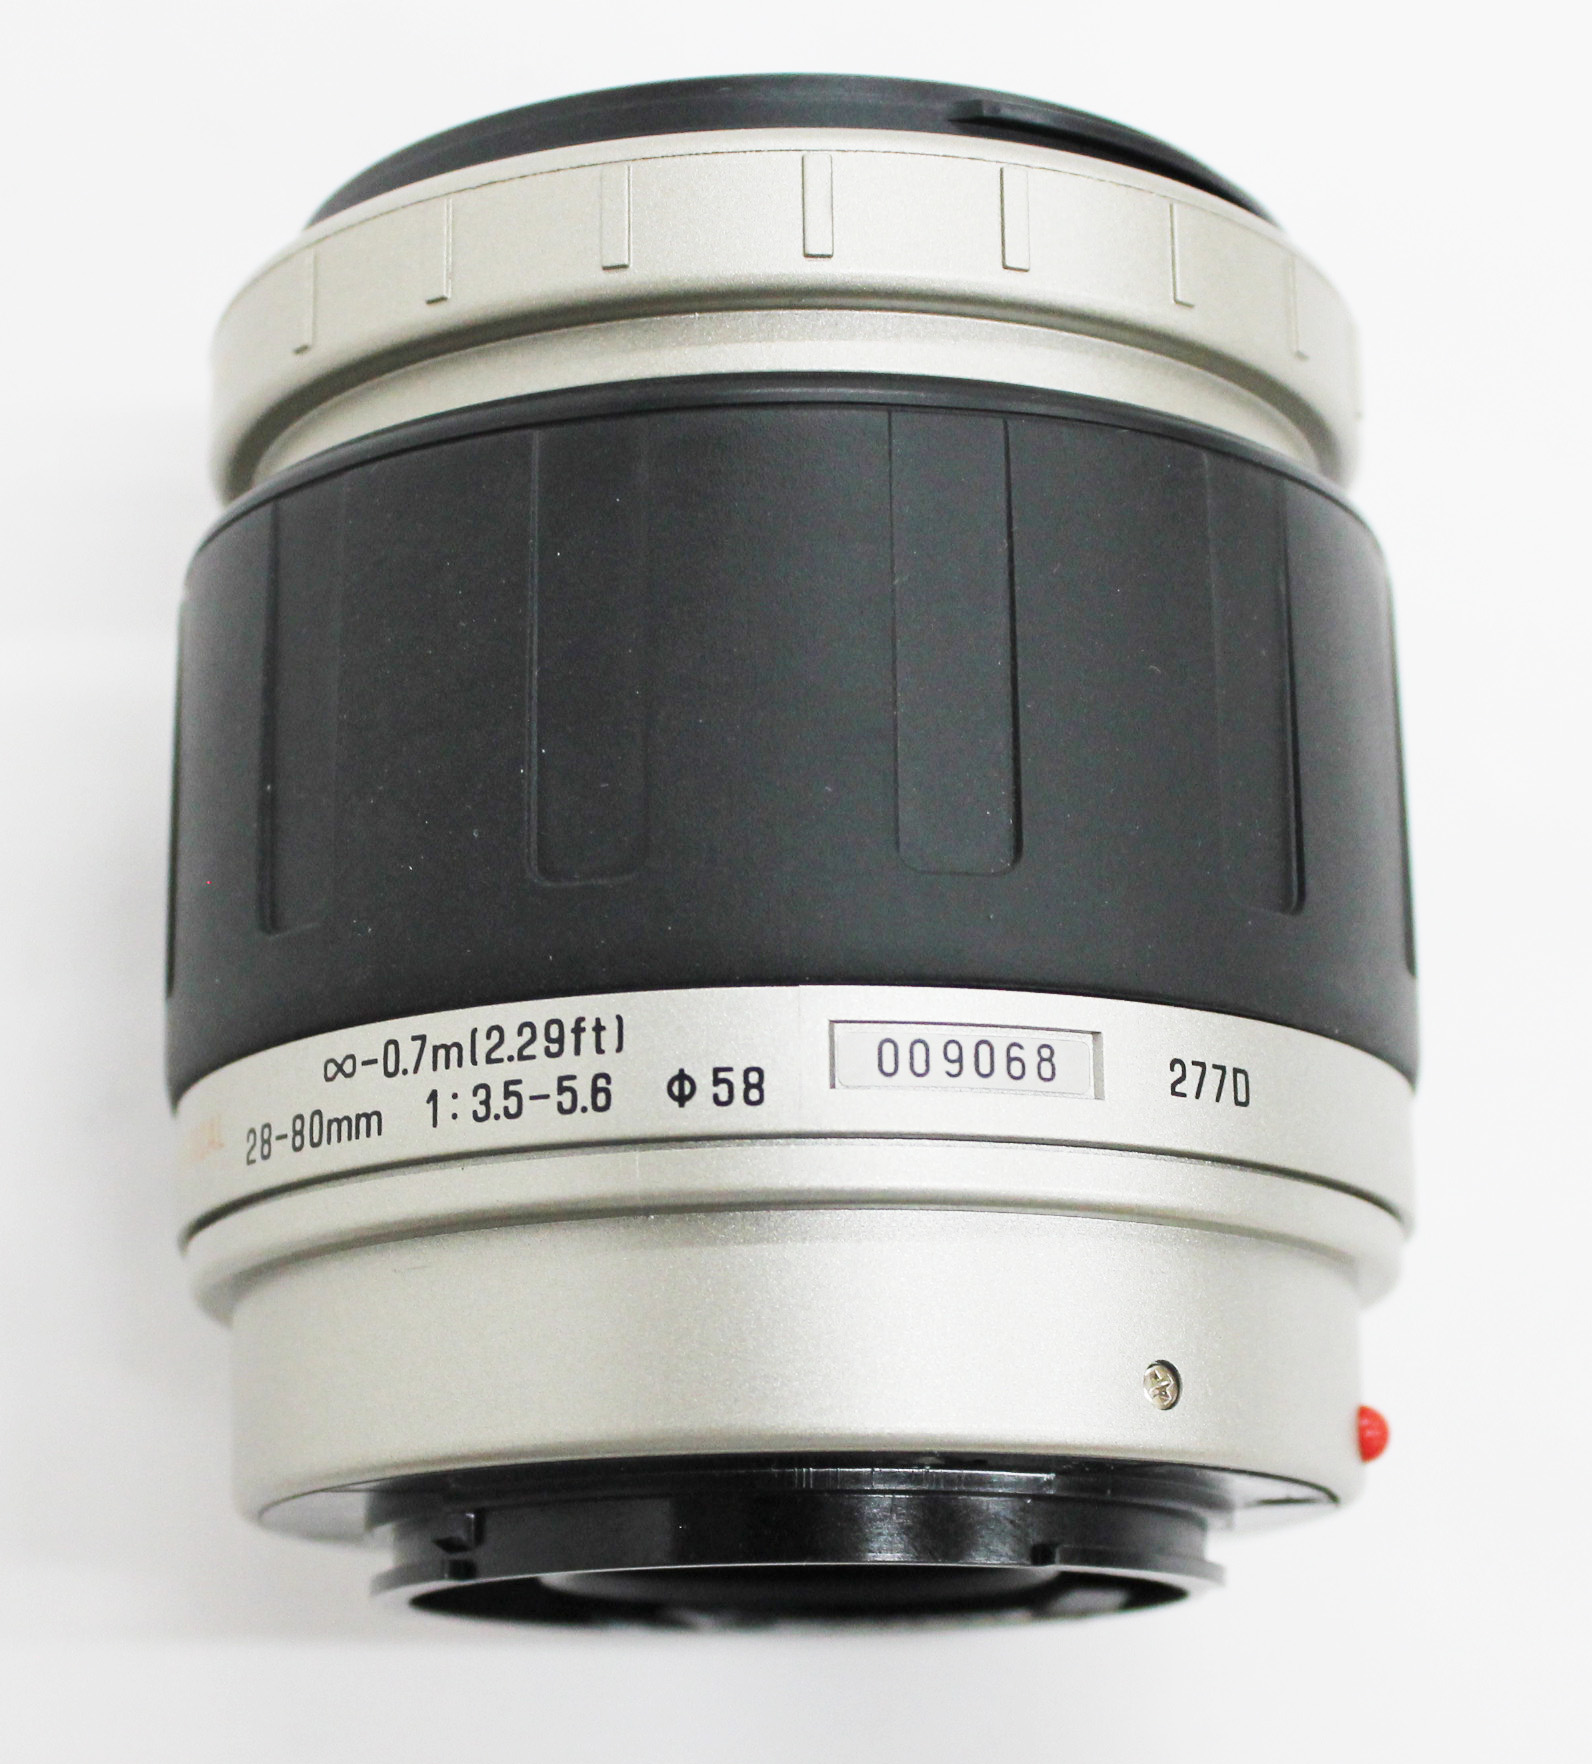  Tamron AF 28-80mm F/3.5-5.6 Lens with Hood for Minolta/Sony A Mount from Japan Photo 4